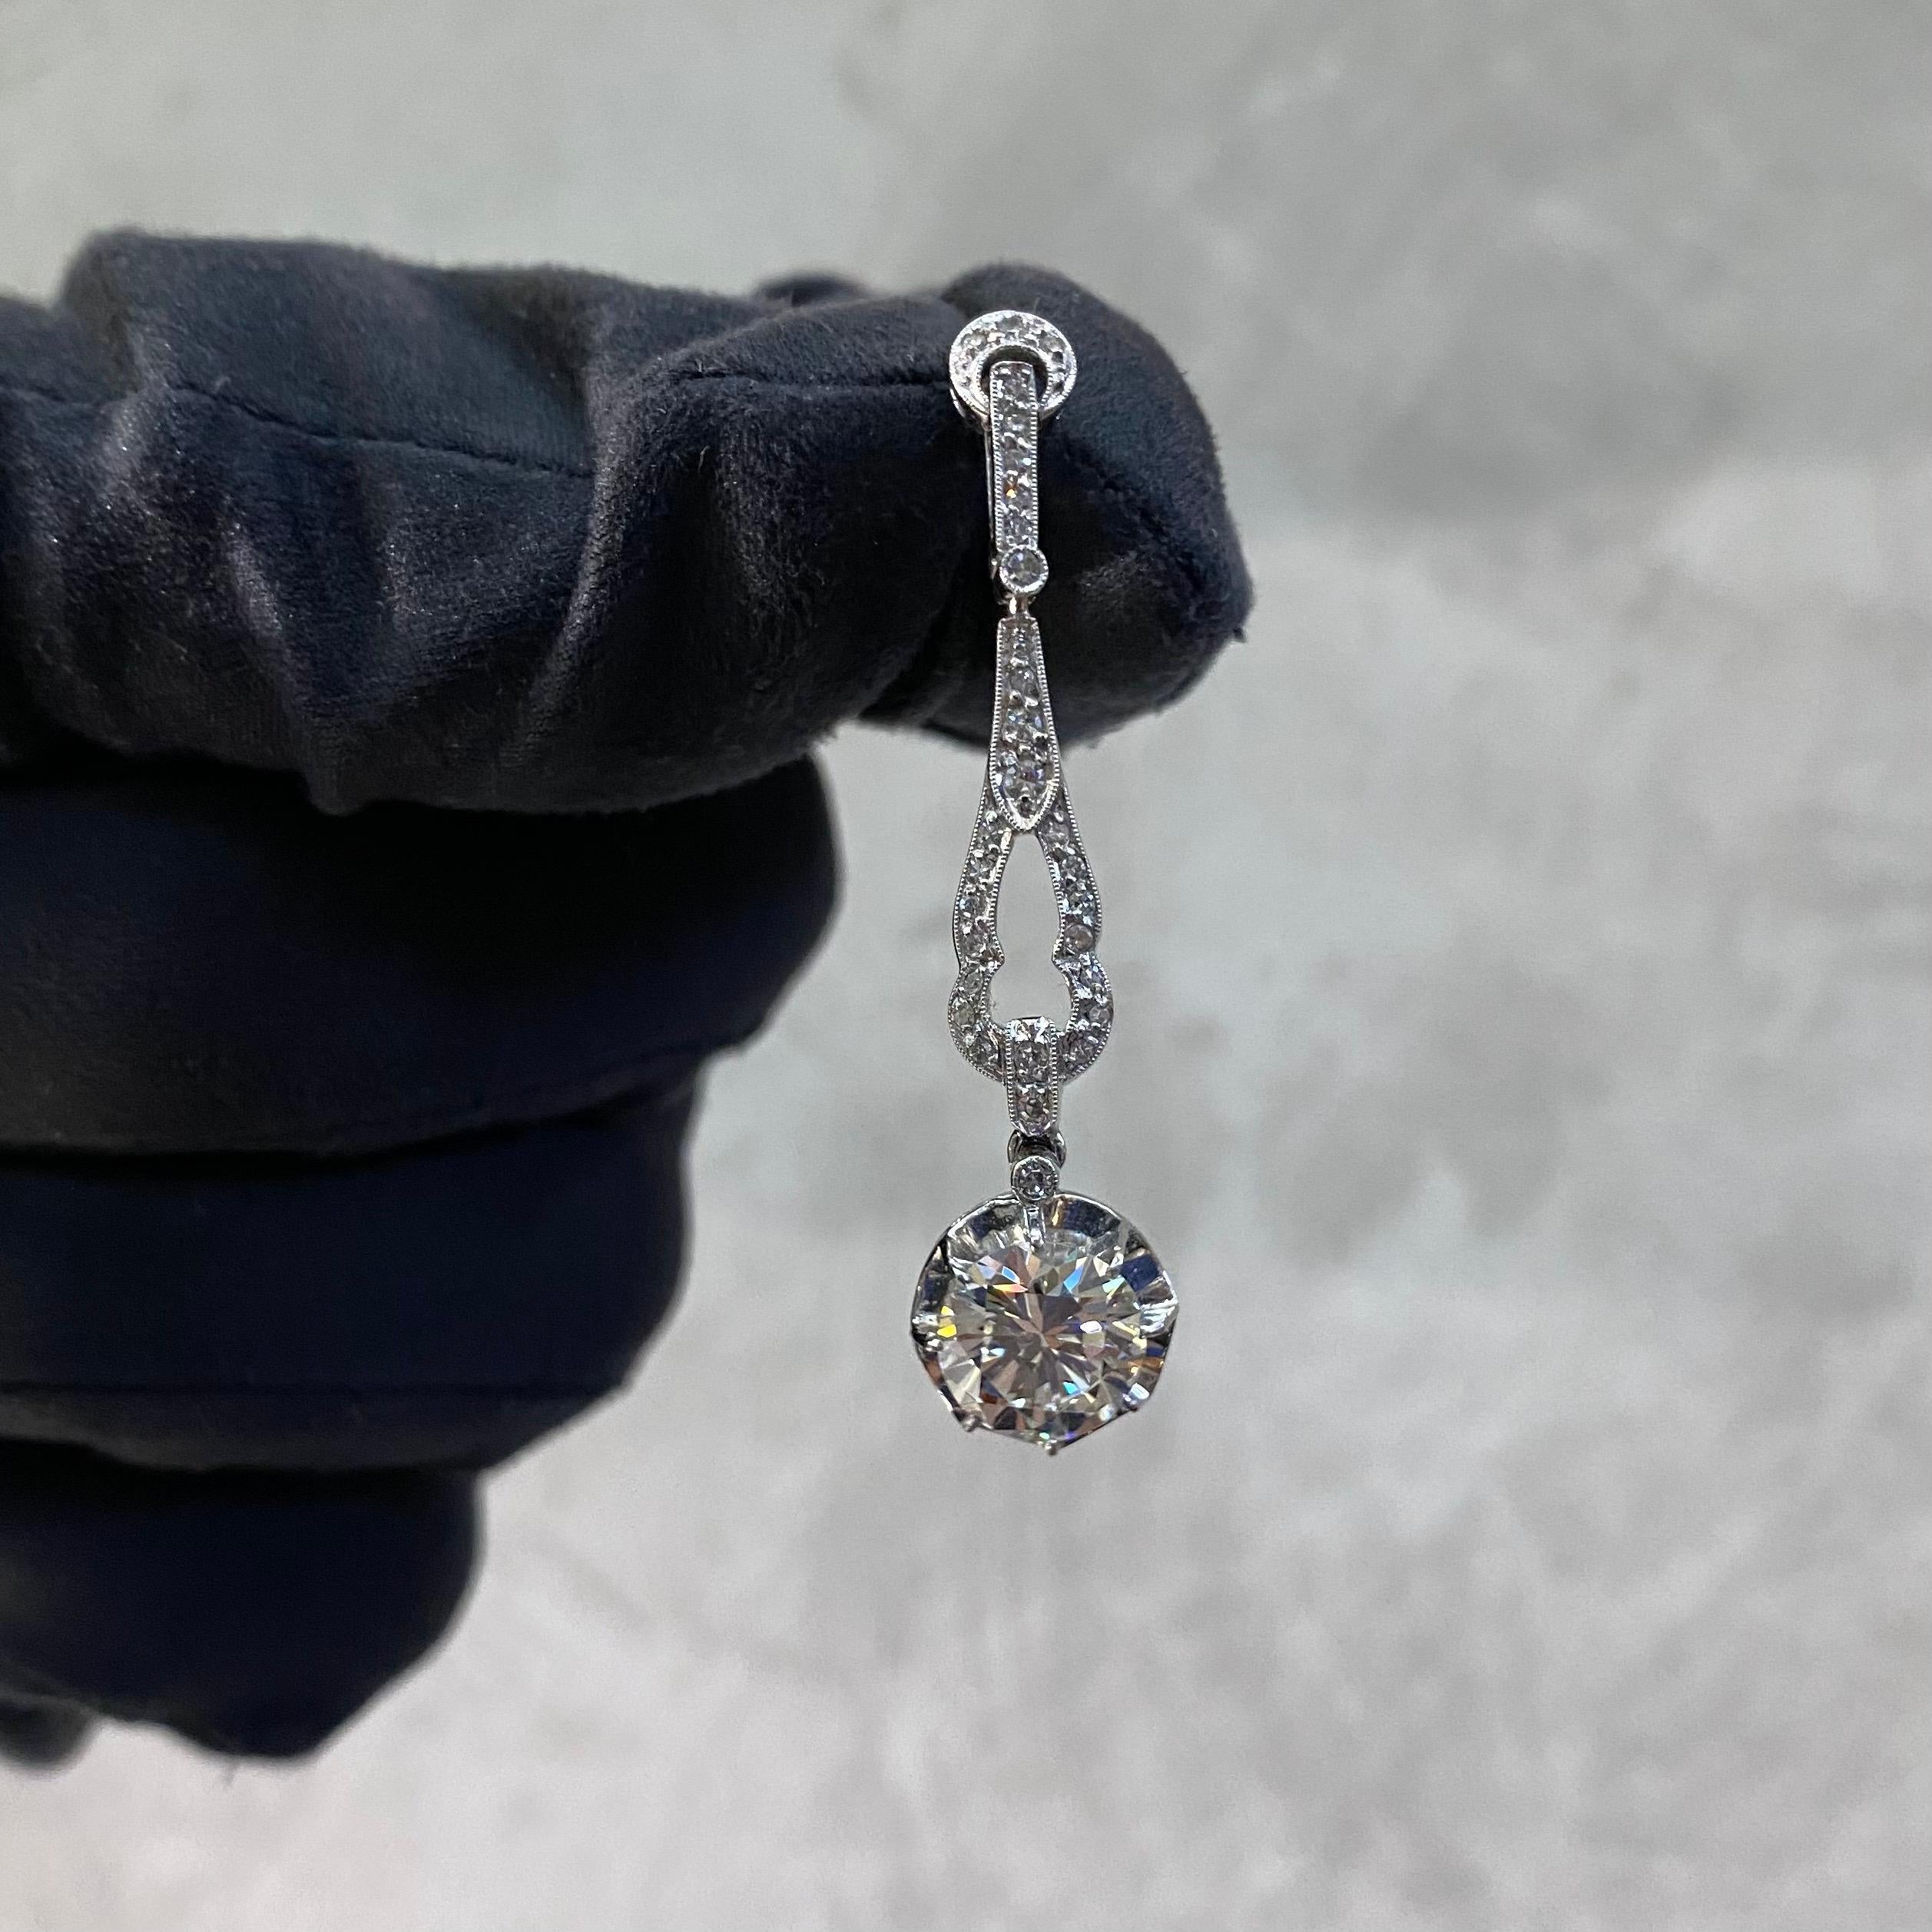 A pair of vintage diamond pendant drop earrings in 18kt white gold, vintage from the 1990s. Designed in the Art Deco style, each earring is composed by a crescent Moon and geometric surmount millegrain-set throughout with single-cut diamonds and it